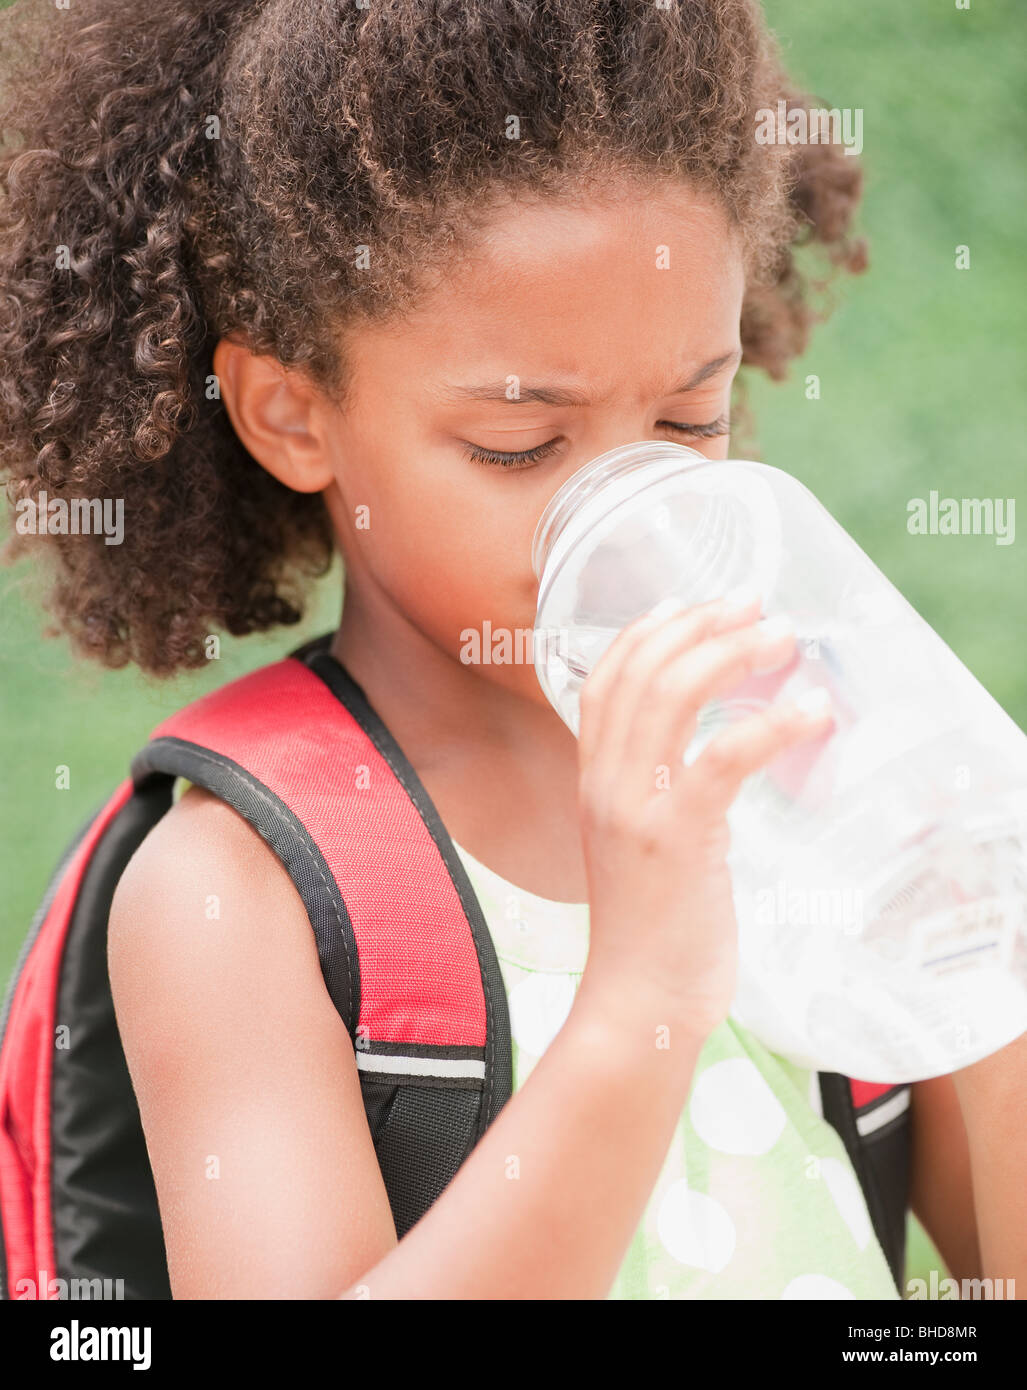 Mixed race girl drinking water Stock Photo